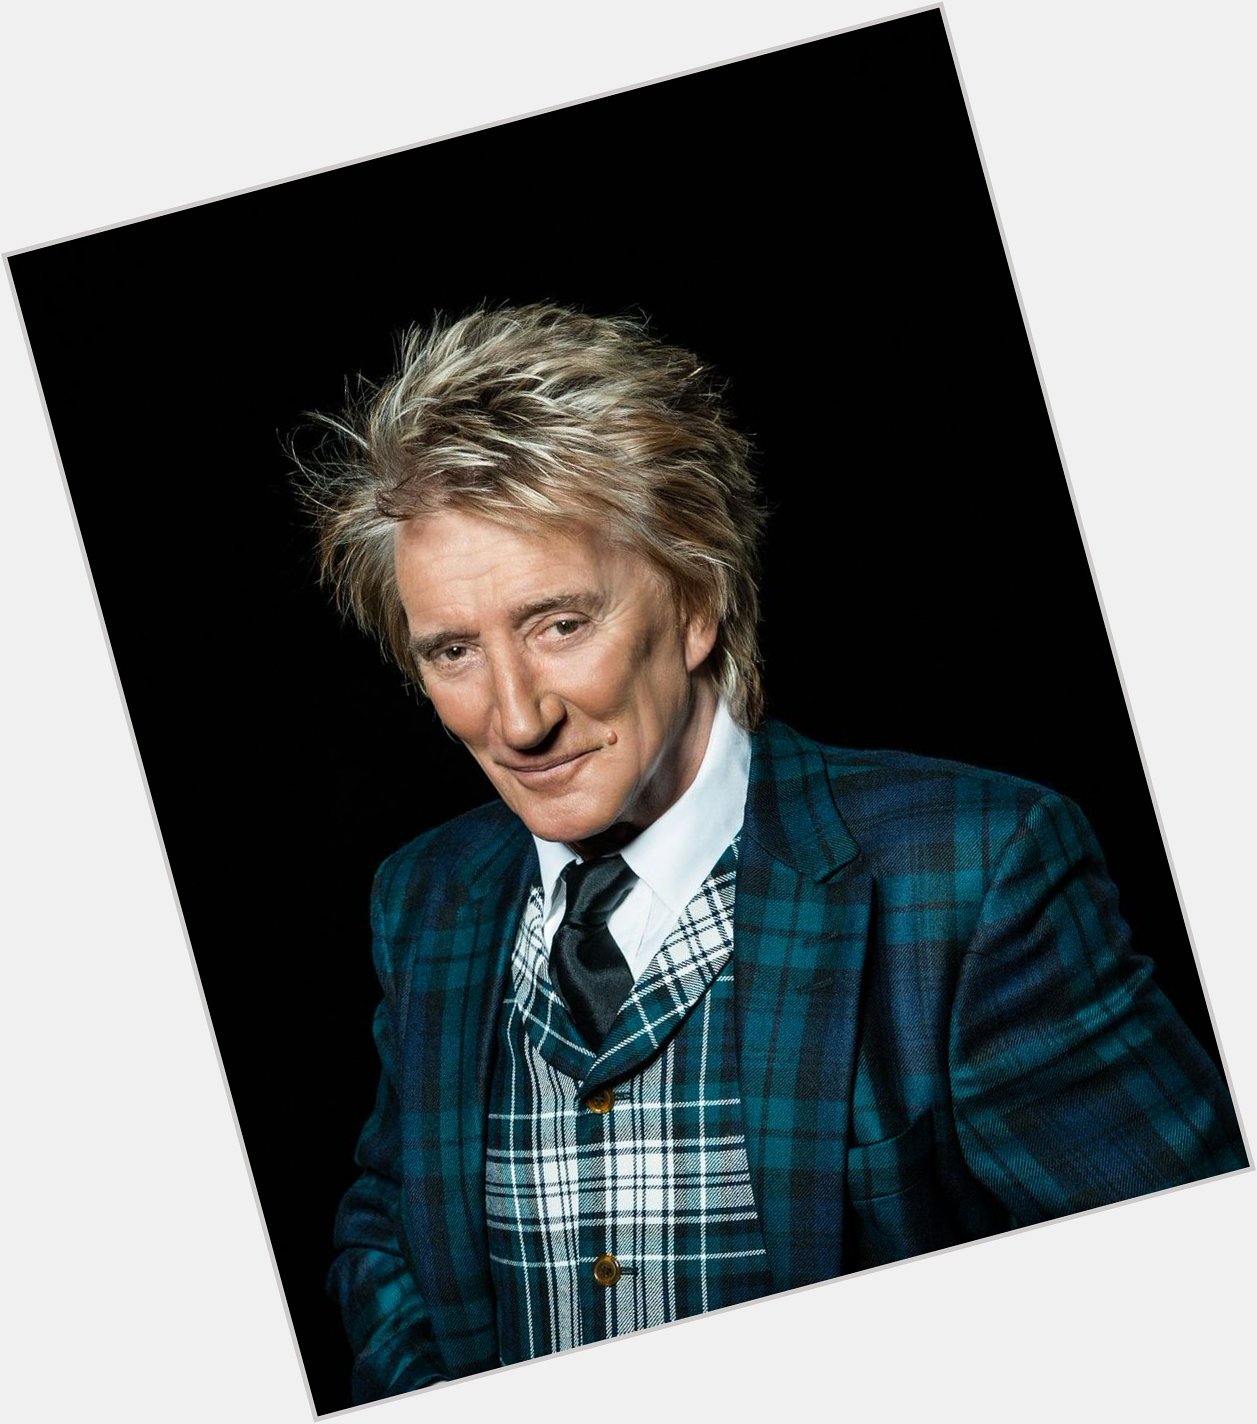 A Big BOSS Happy Birthday to Sir Rod Stewart today from all of us at The Boss 